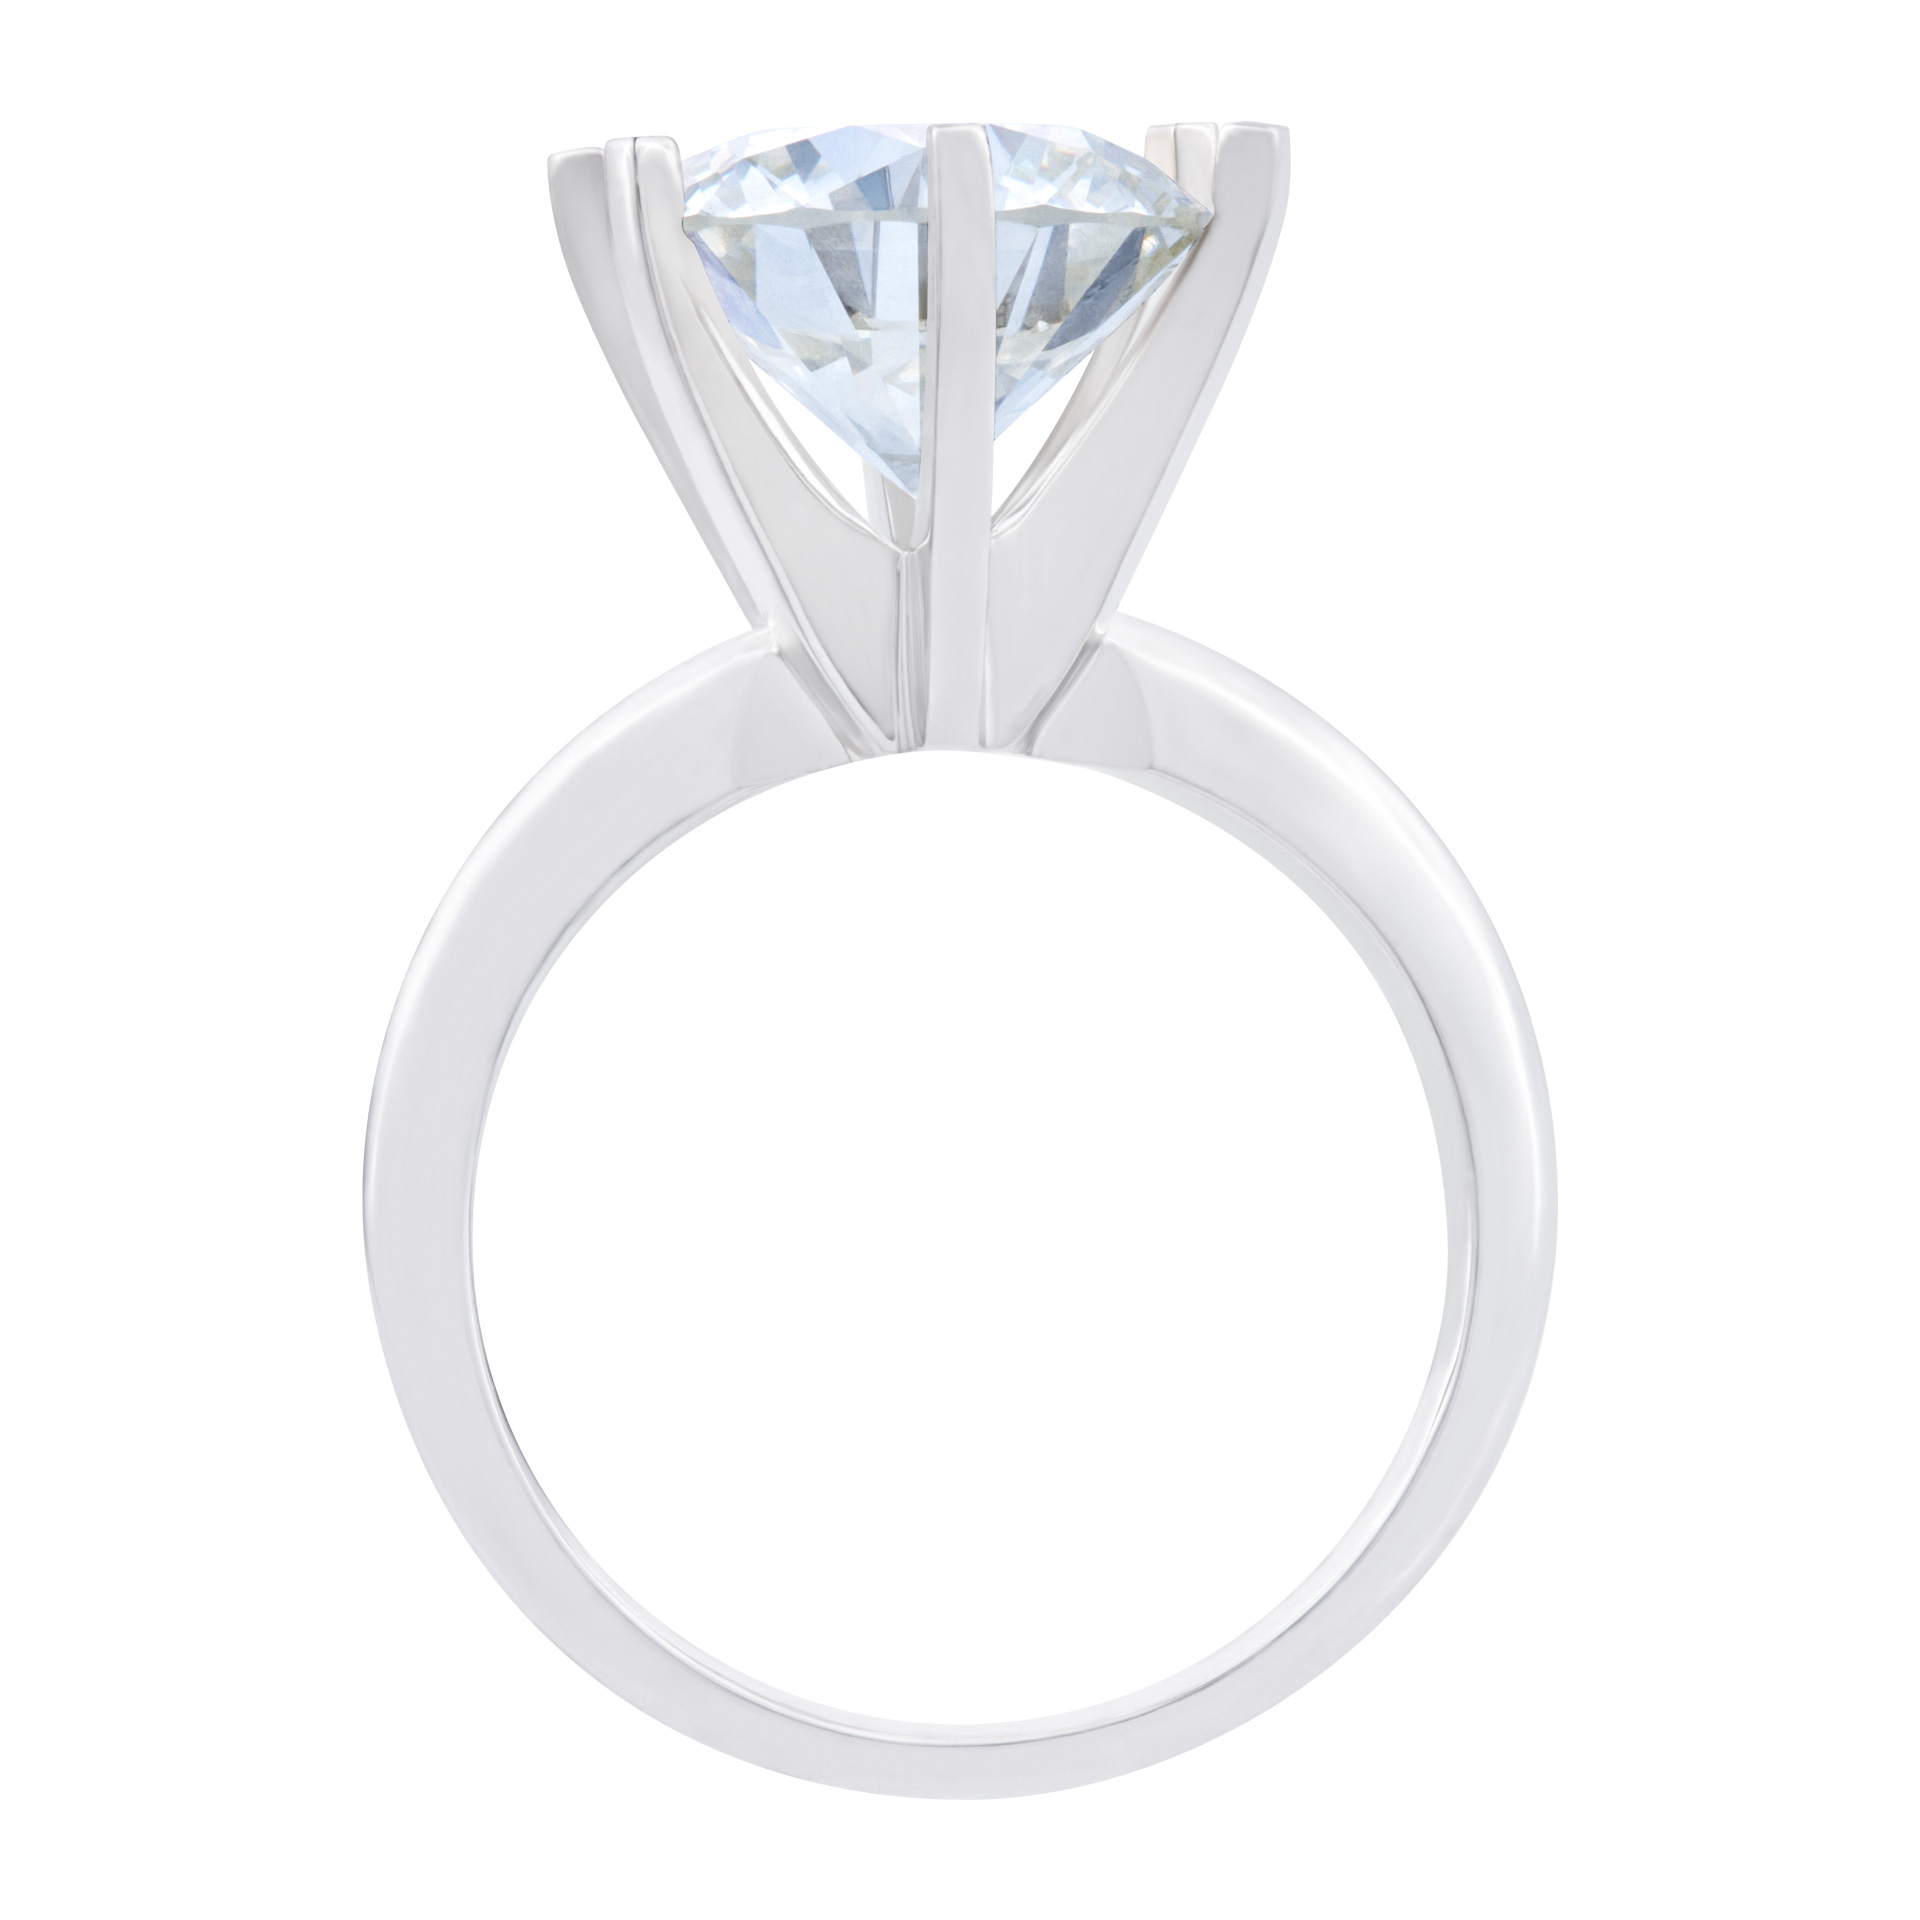 Gia Certified Round Diamond 4.01 Cts (J Color Si-1 Clarity) image 2